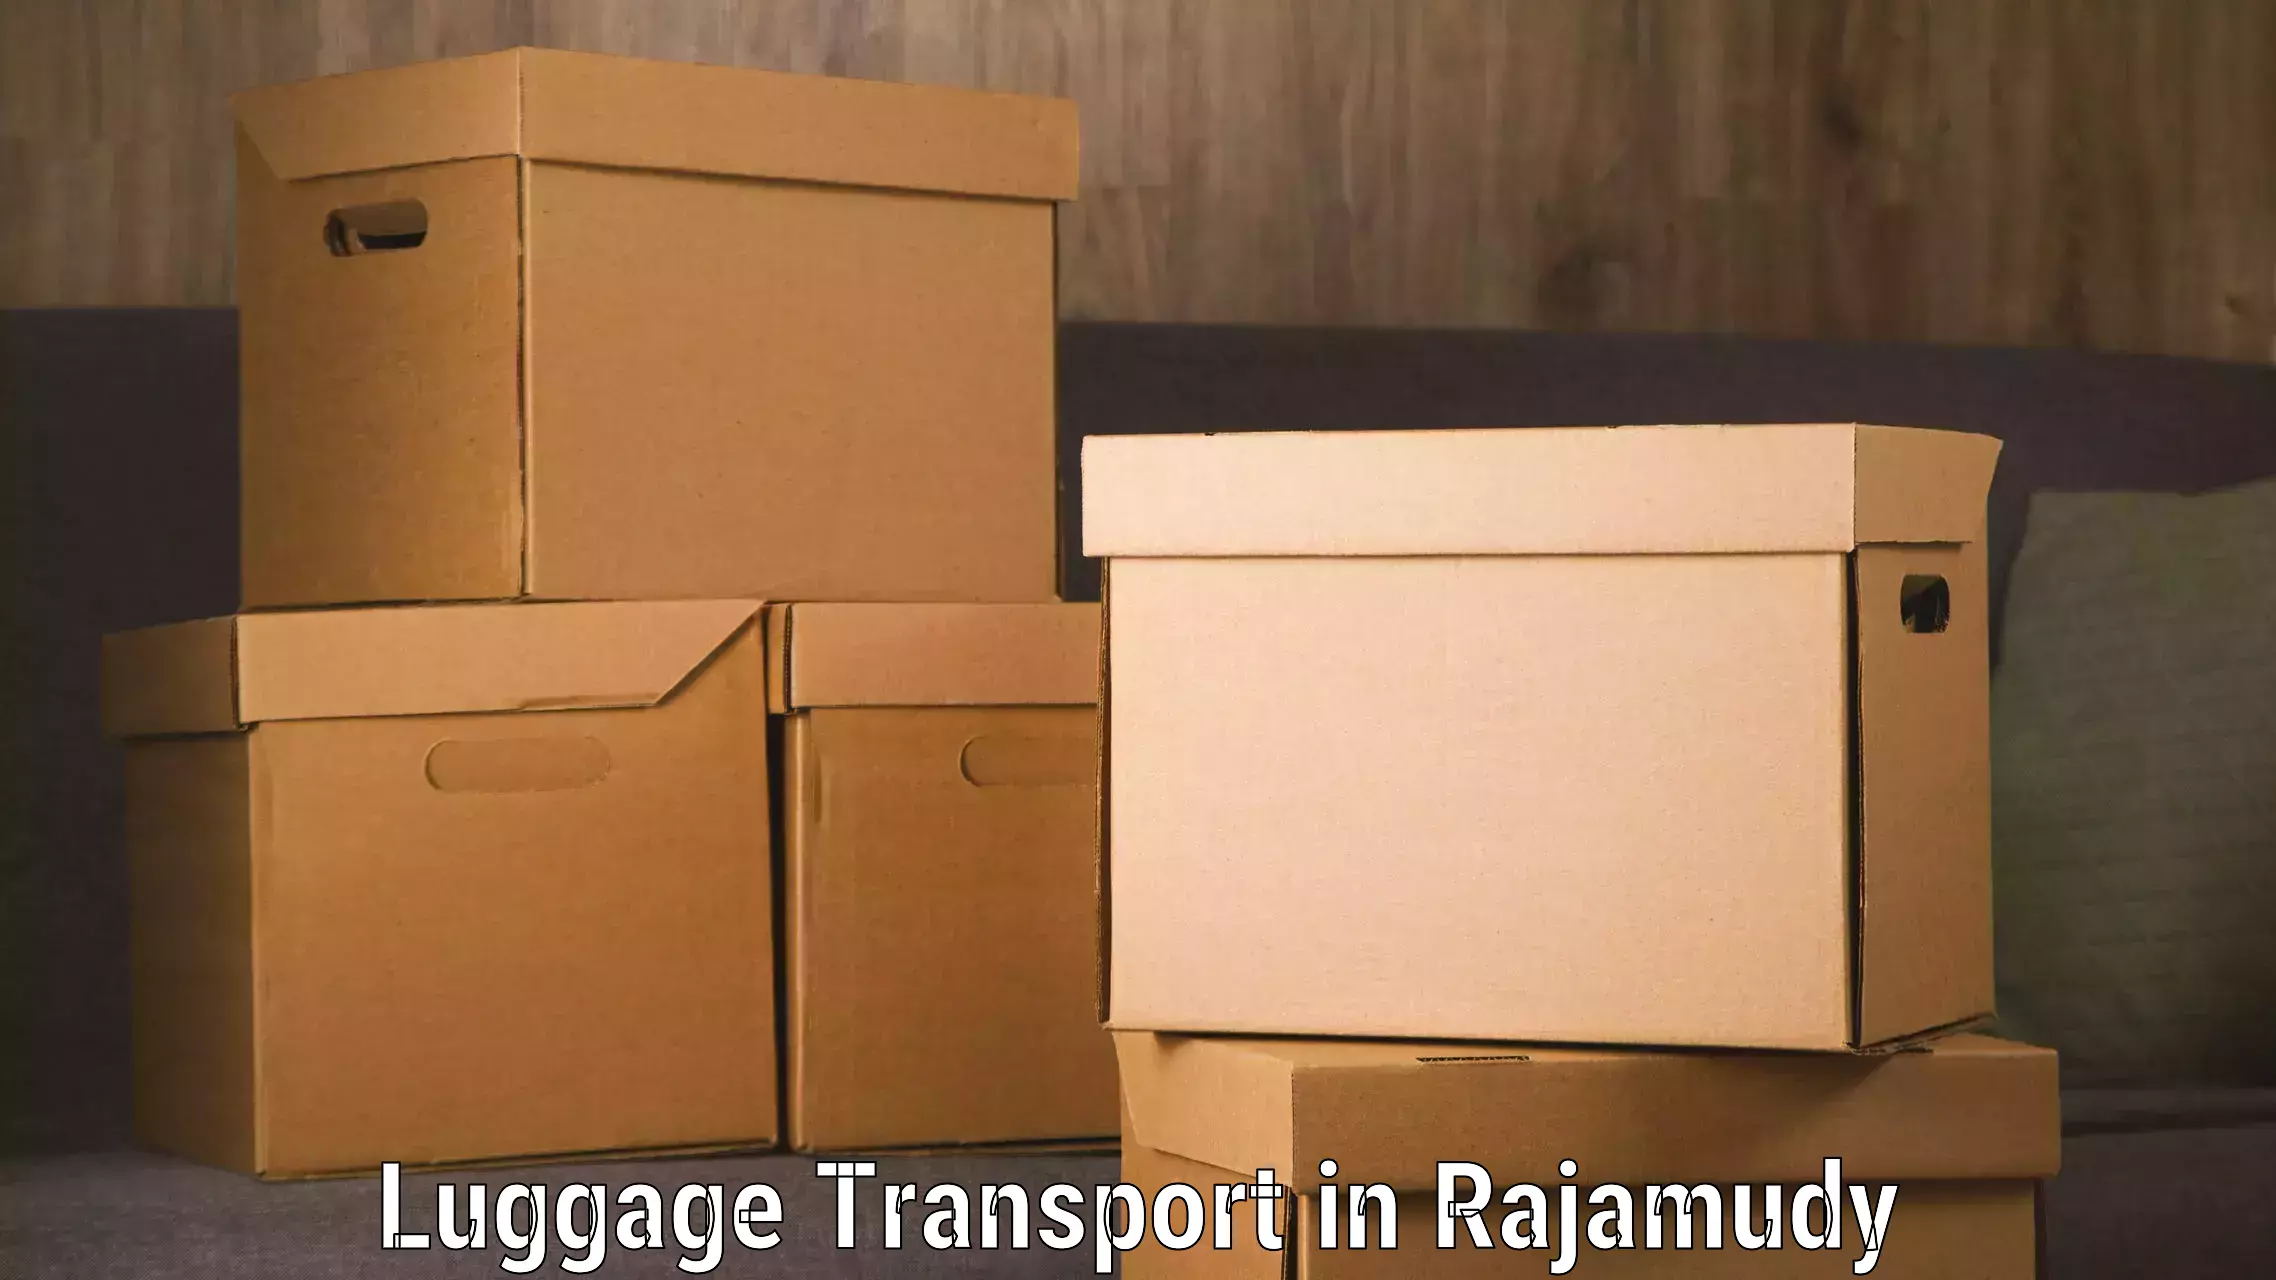 Luggage shipping planner in Rajamudy